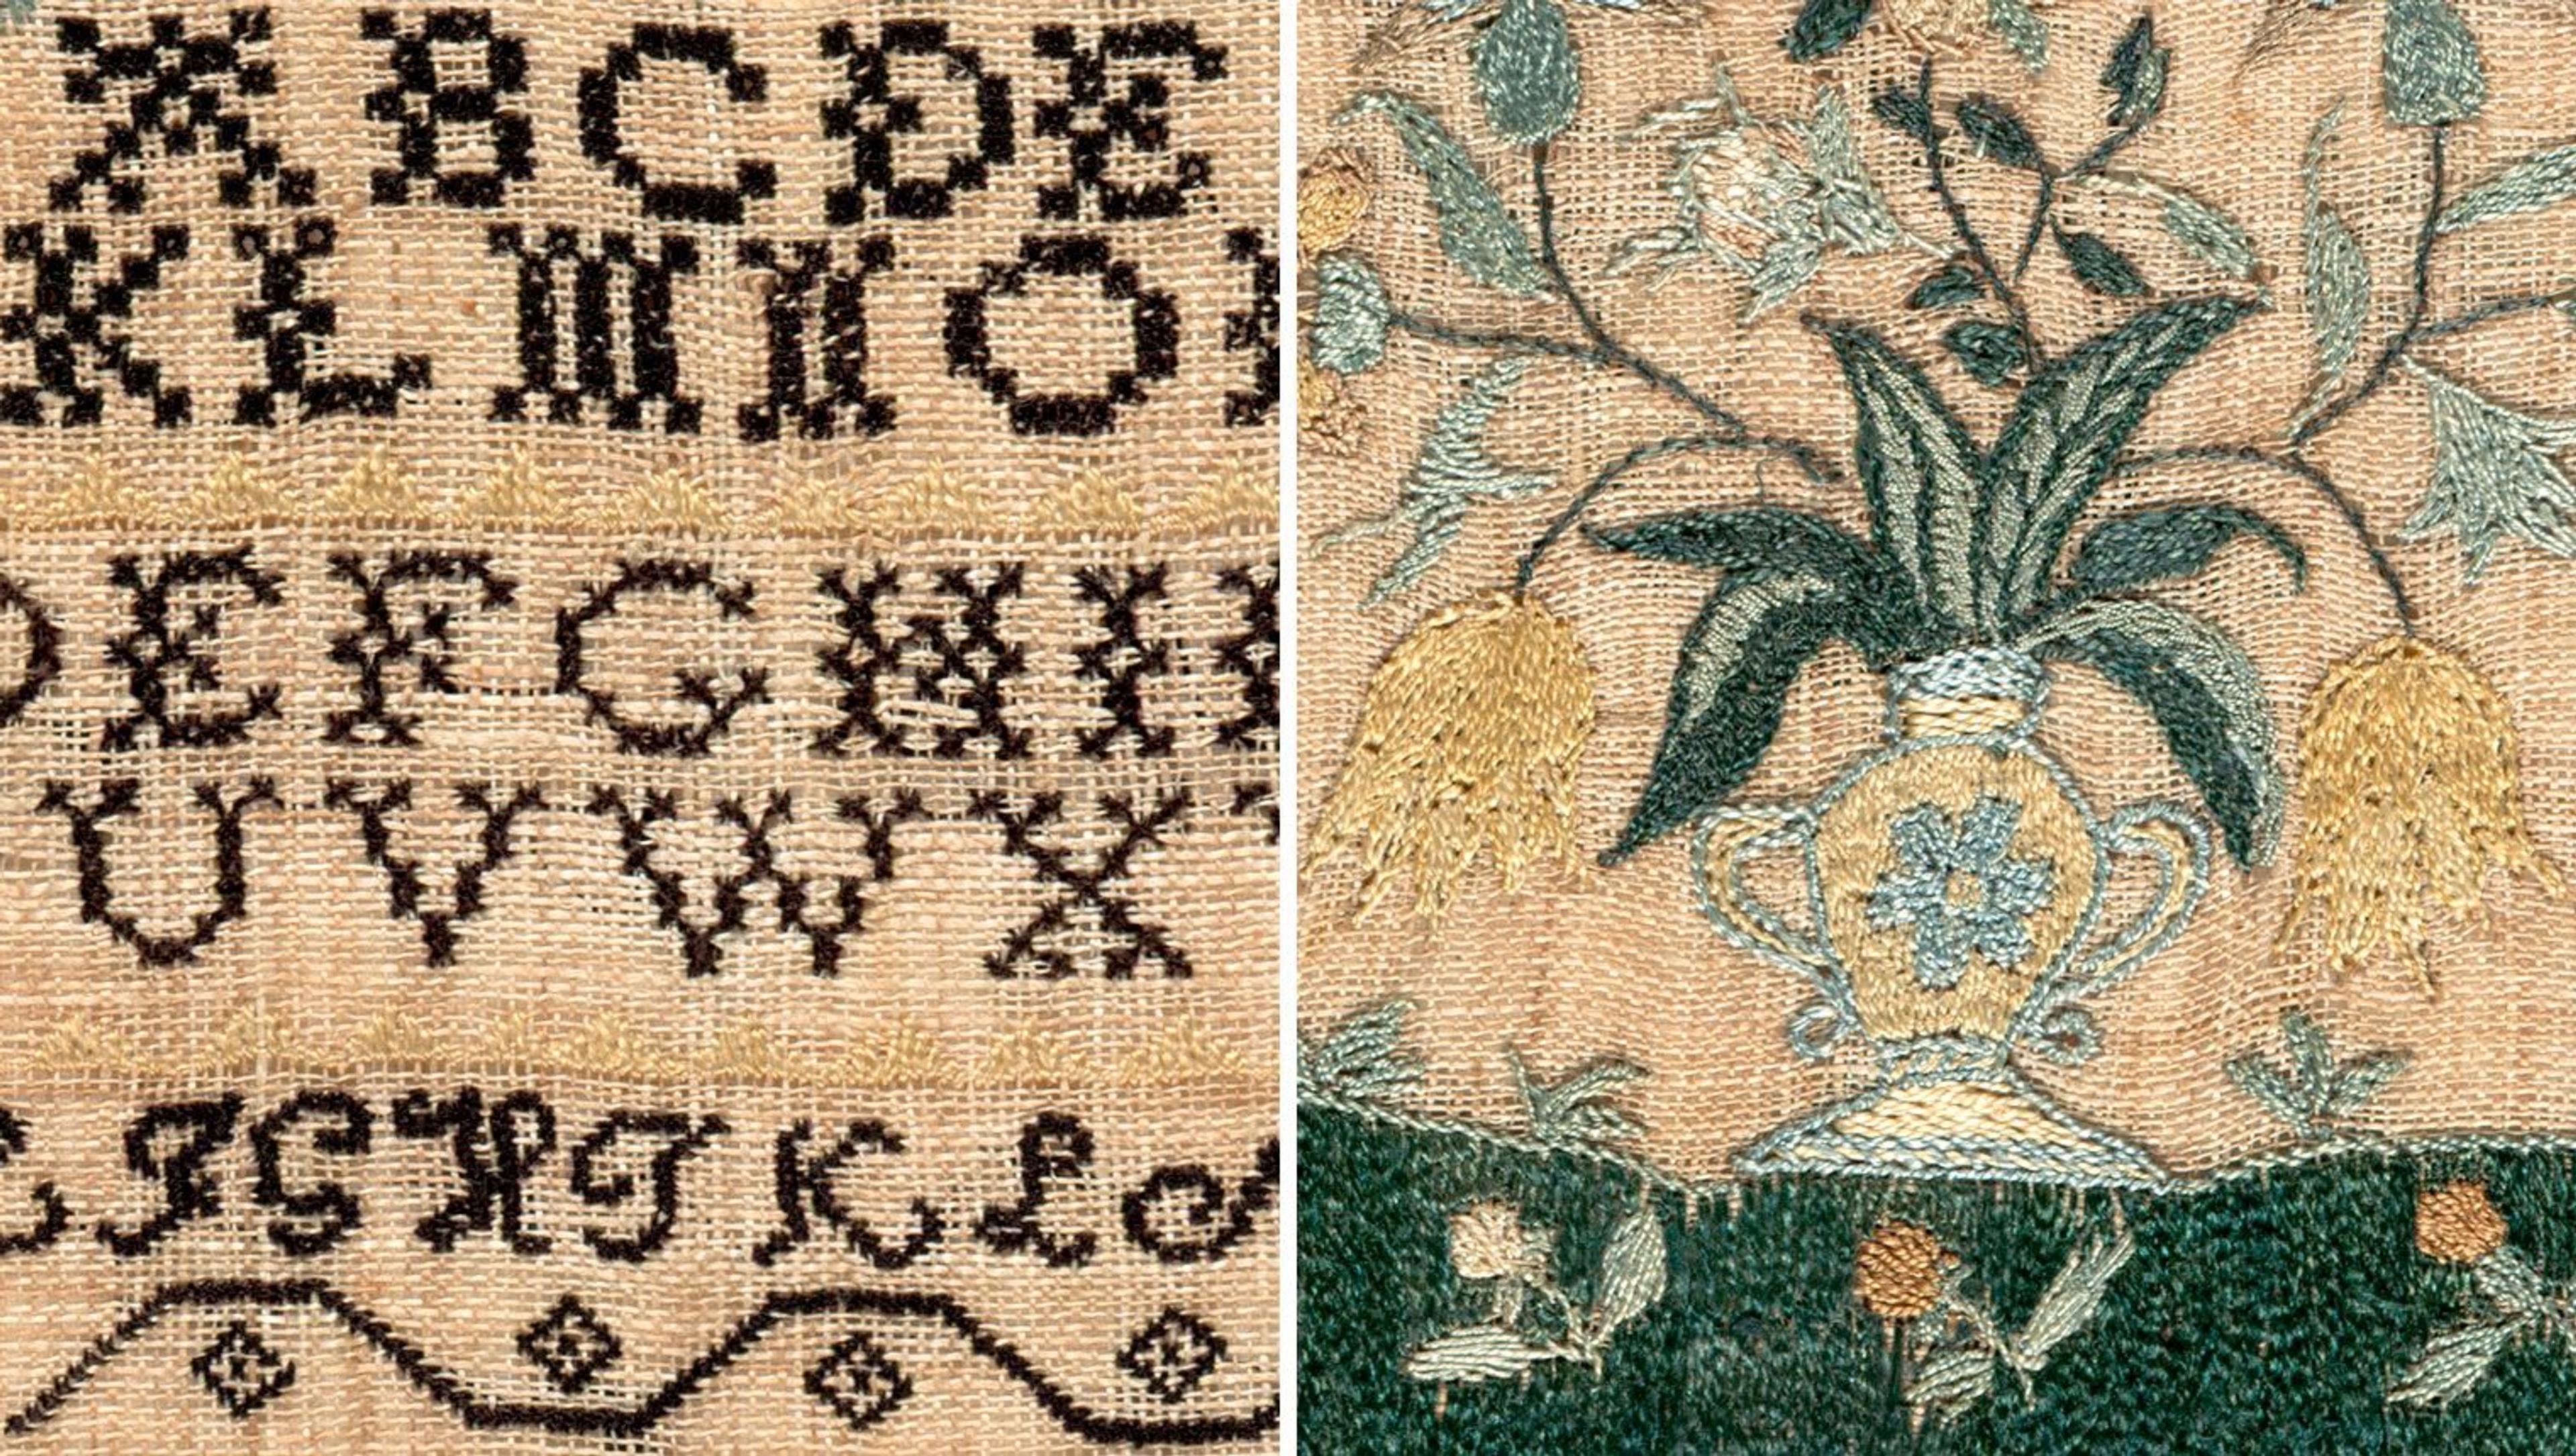 On the left is a closeup image of Lydia Pearson's sampler, showcasing her embroidery of the alphabet in black thread on tan linen. On the right is another closeup image of the same sampler, showcasing detailed embroidery of a vase with pale blue and yellow flowers on green grass.